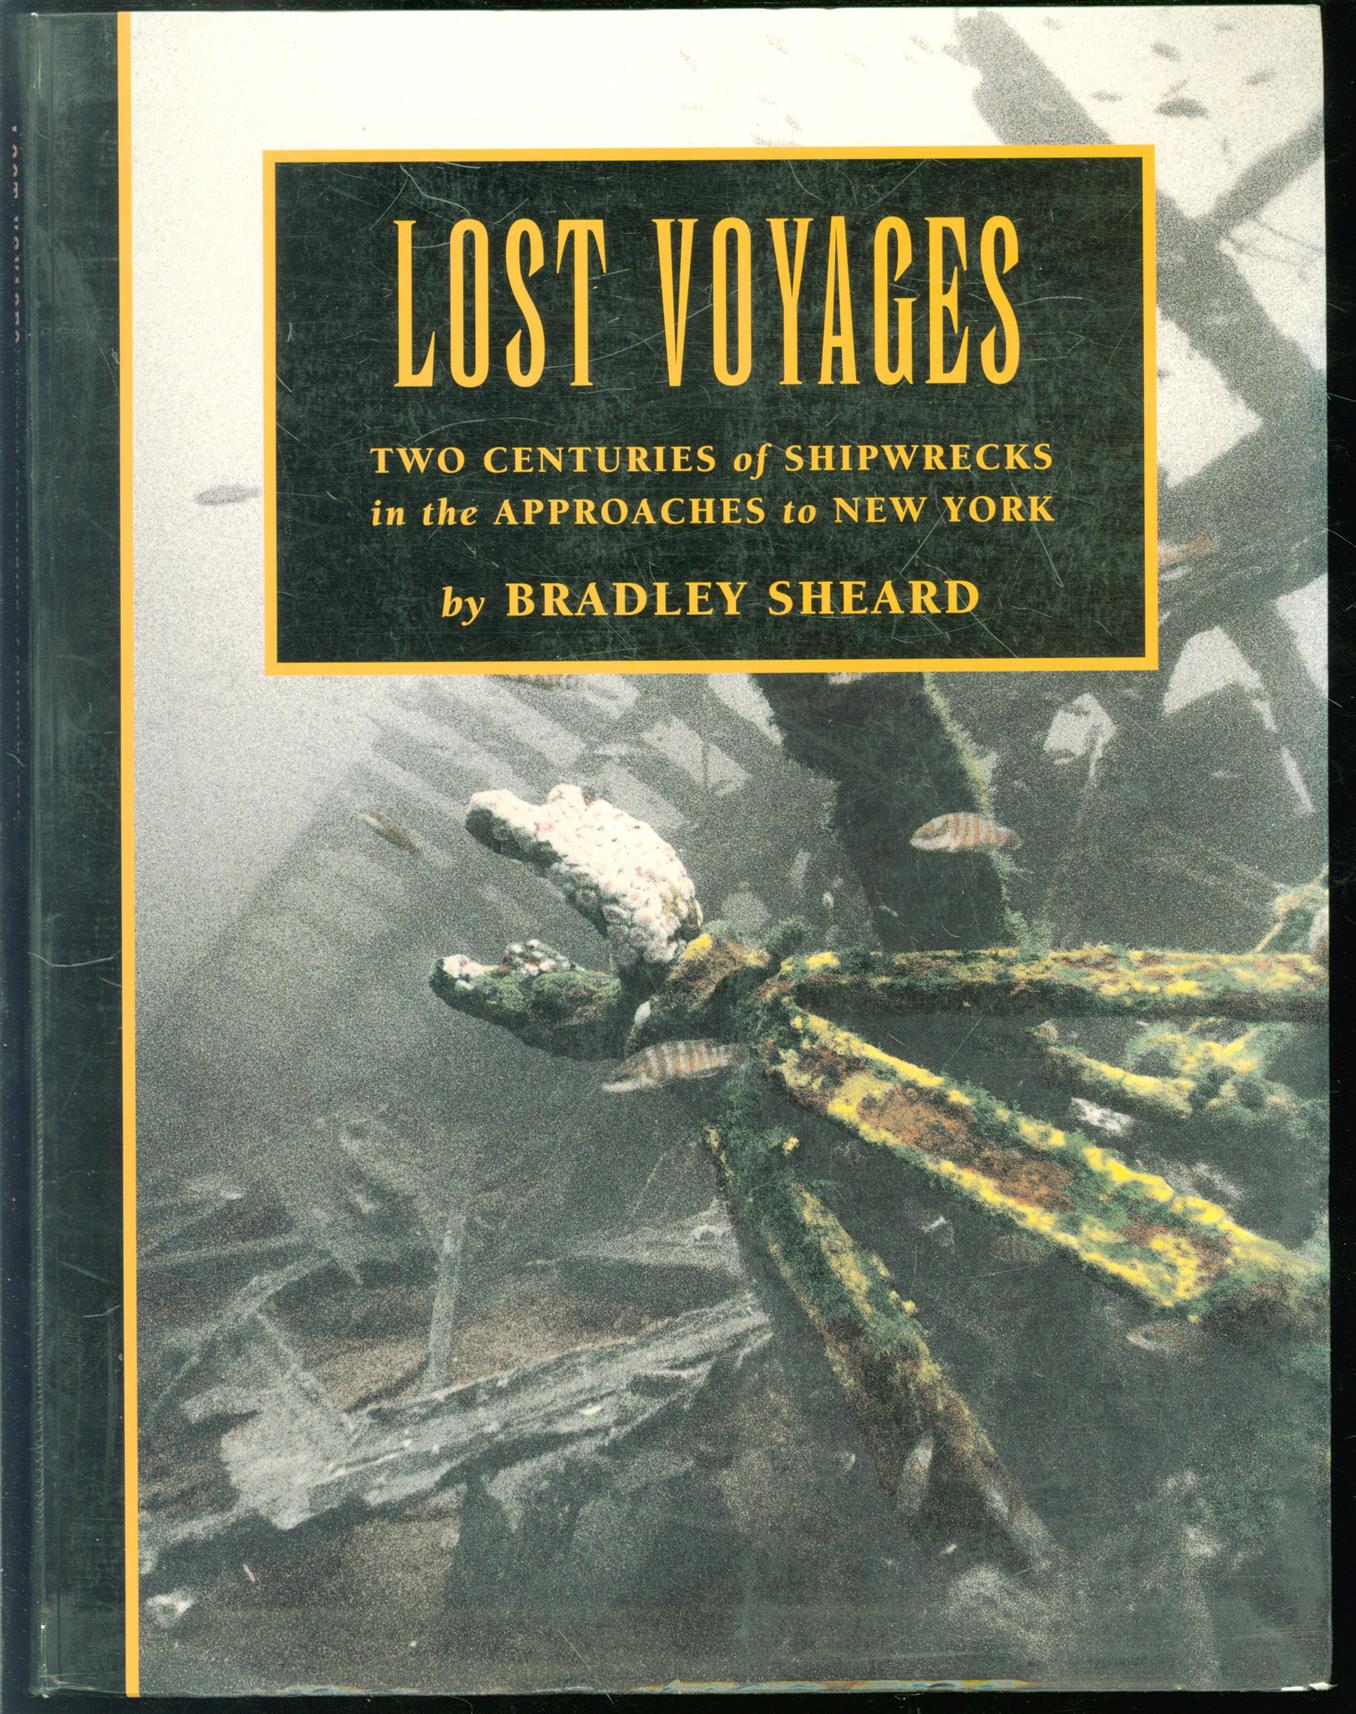 Lost voyages : two centuries of shipwrecks in the approaches to New York - Bradley Sheard